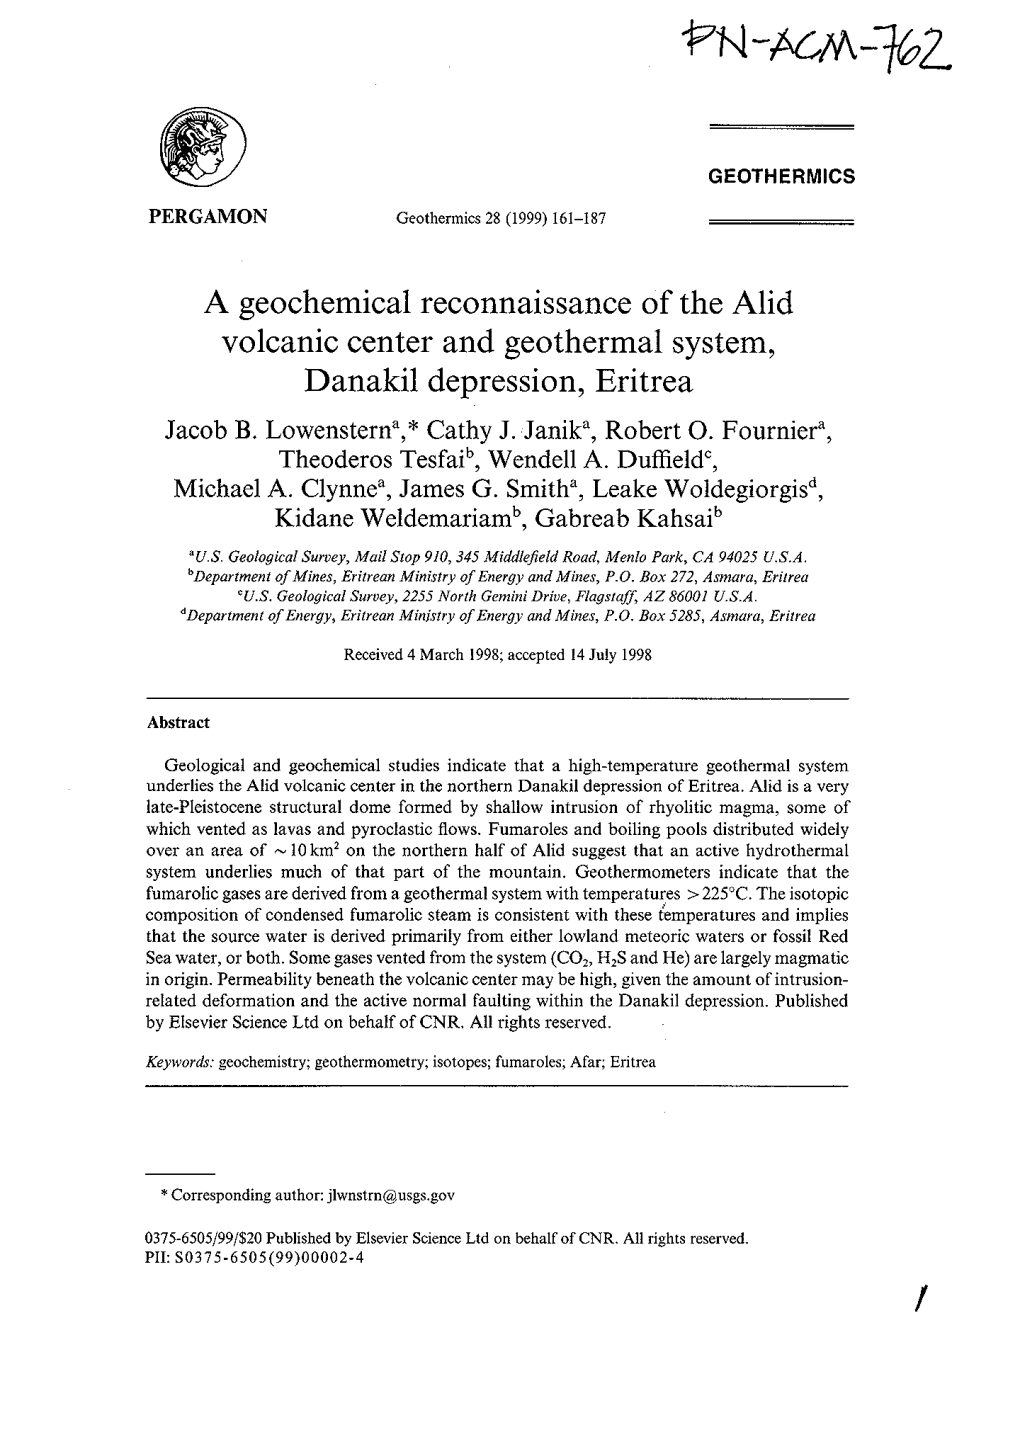 A Geochemical Reconnaissance of the Alid Volcanic Center and Geothermal System, Danakil Depression, Eritrea Jacob B